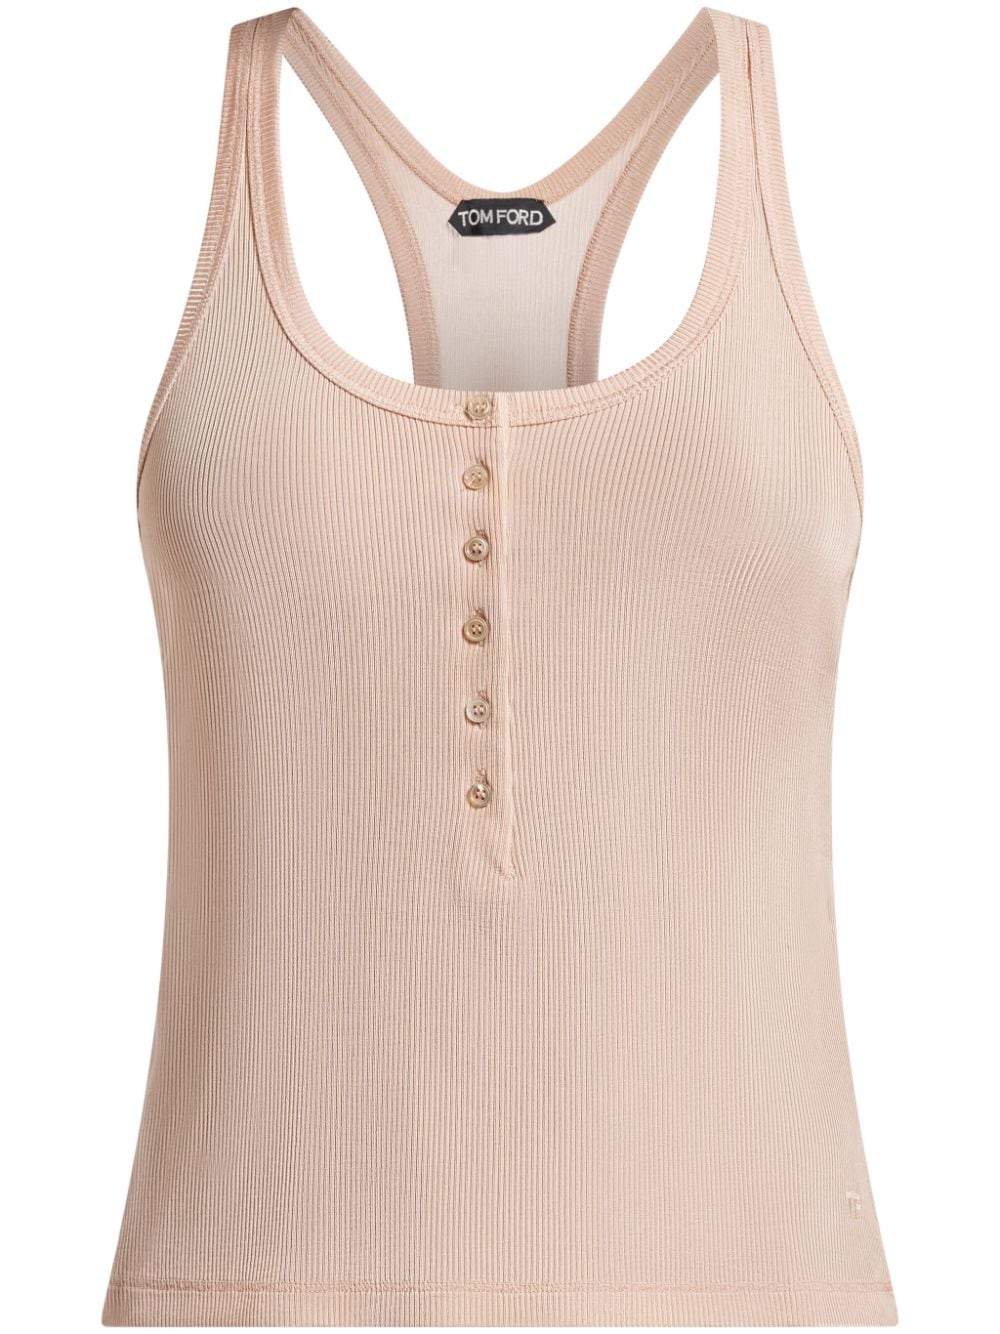 TOM FORD ribbed tank top - Pink von TOM FORD